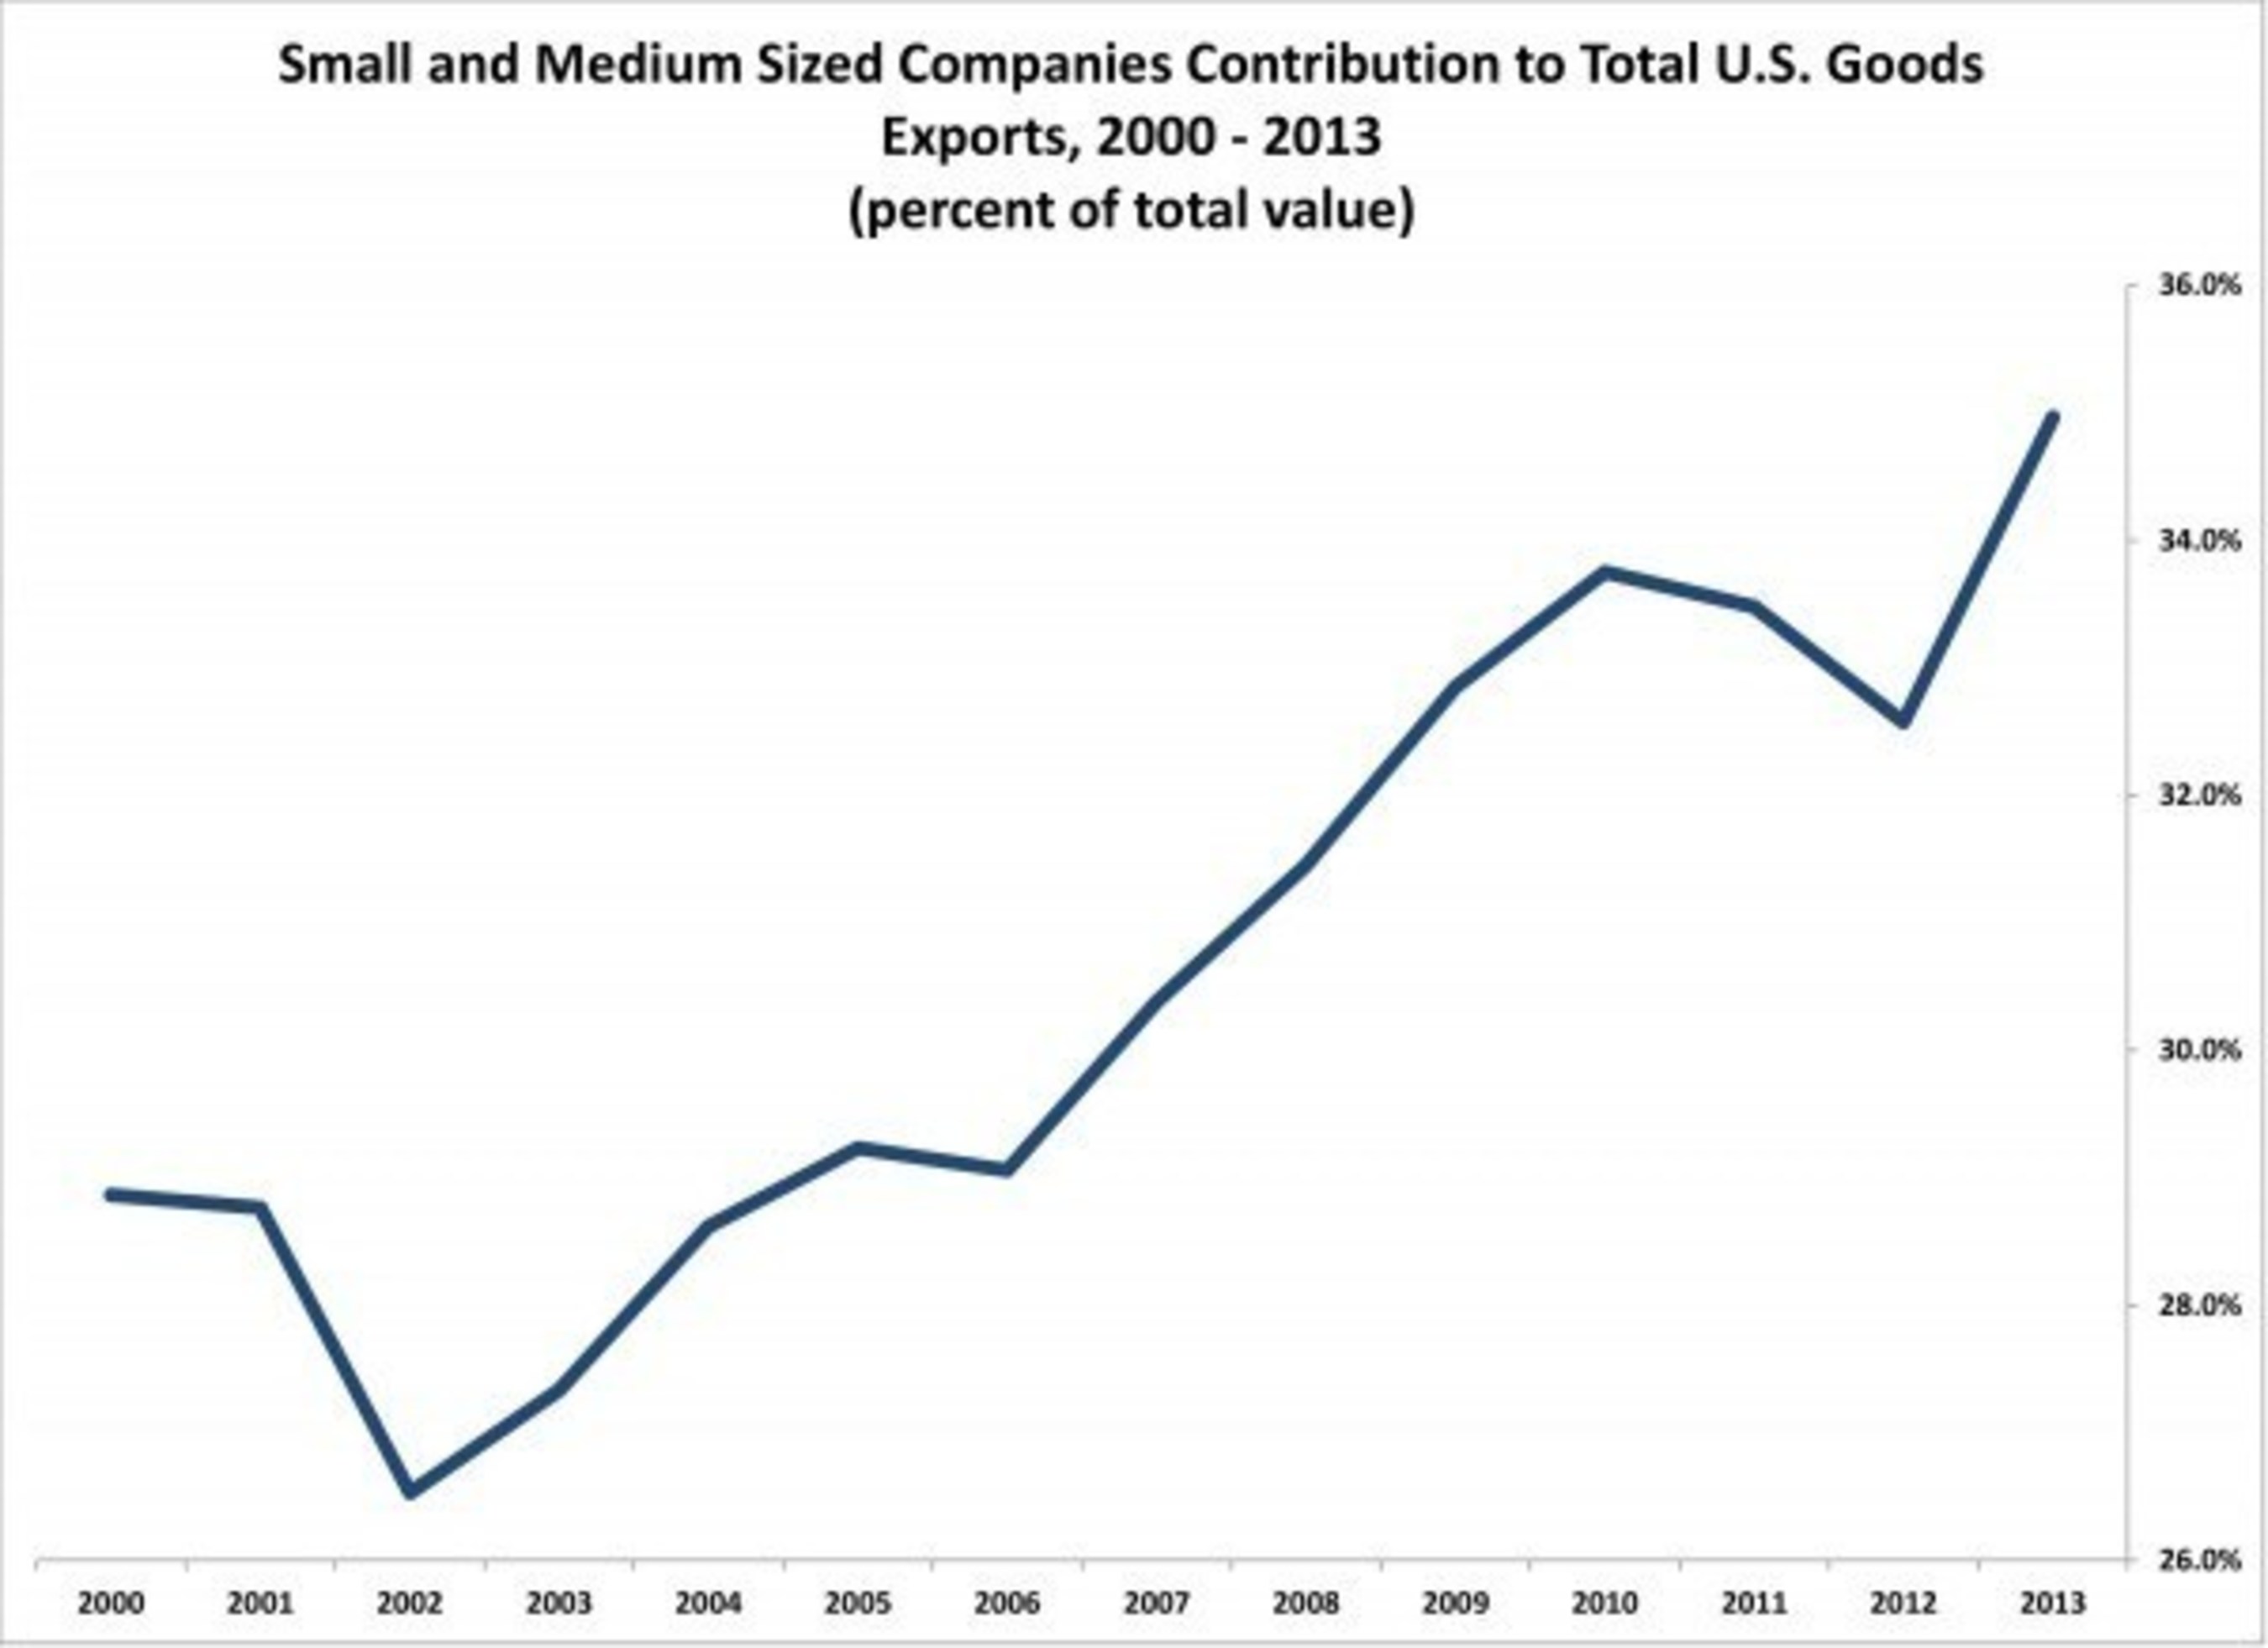 Small and Medium Sized Companies Contribution to Total U.S. Goods Exports, 2000-2013